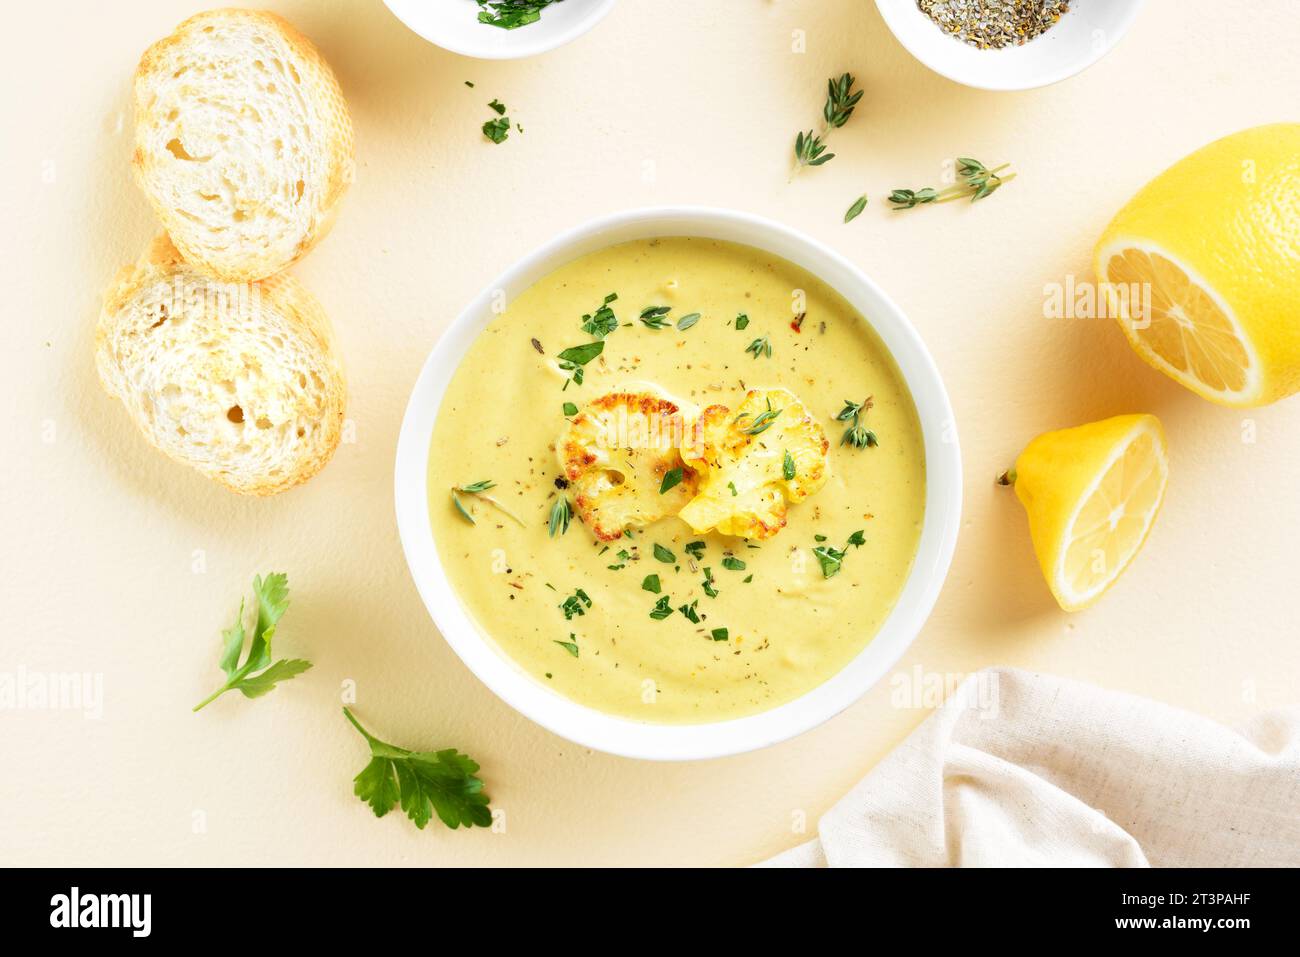 Cauliflower cheese soup in bowl over light background. Vegetarian or healthy diet food concept. Top view, flat lay Stock Photo